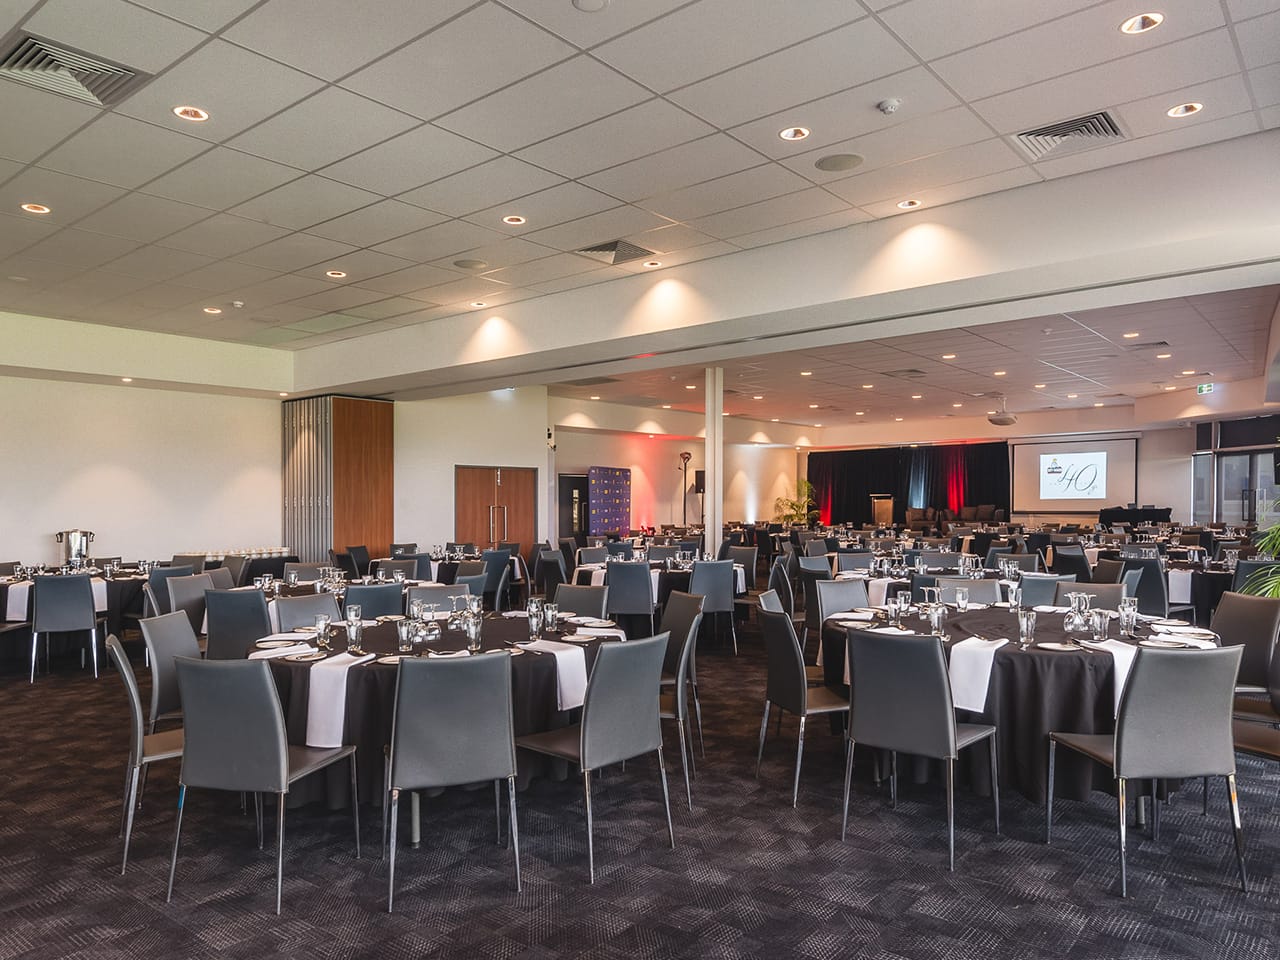 Tables And Chairs In Banquet Style Setup Inside The Function Room With Projection Screen In Front